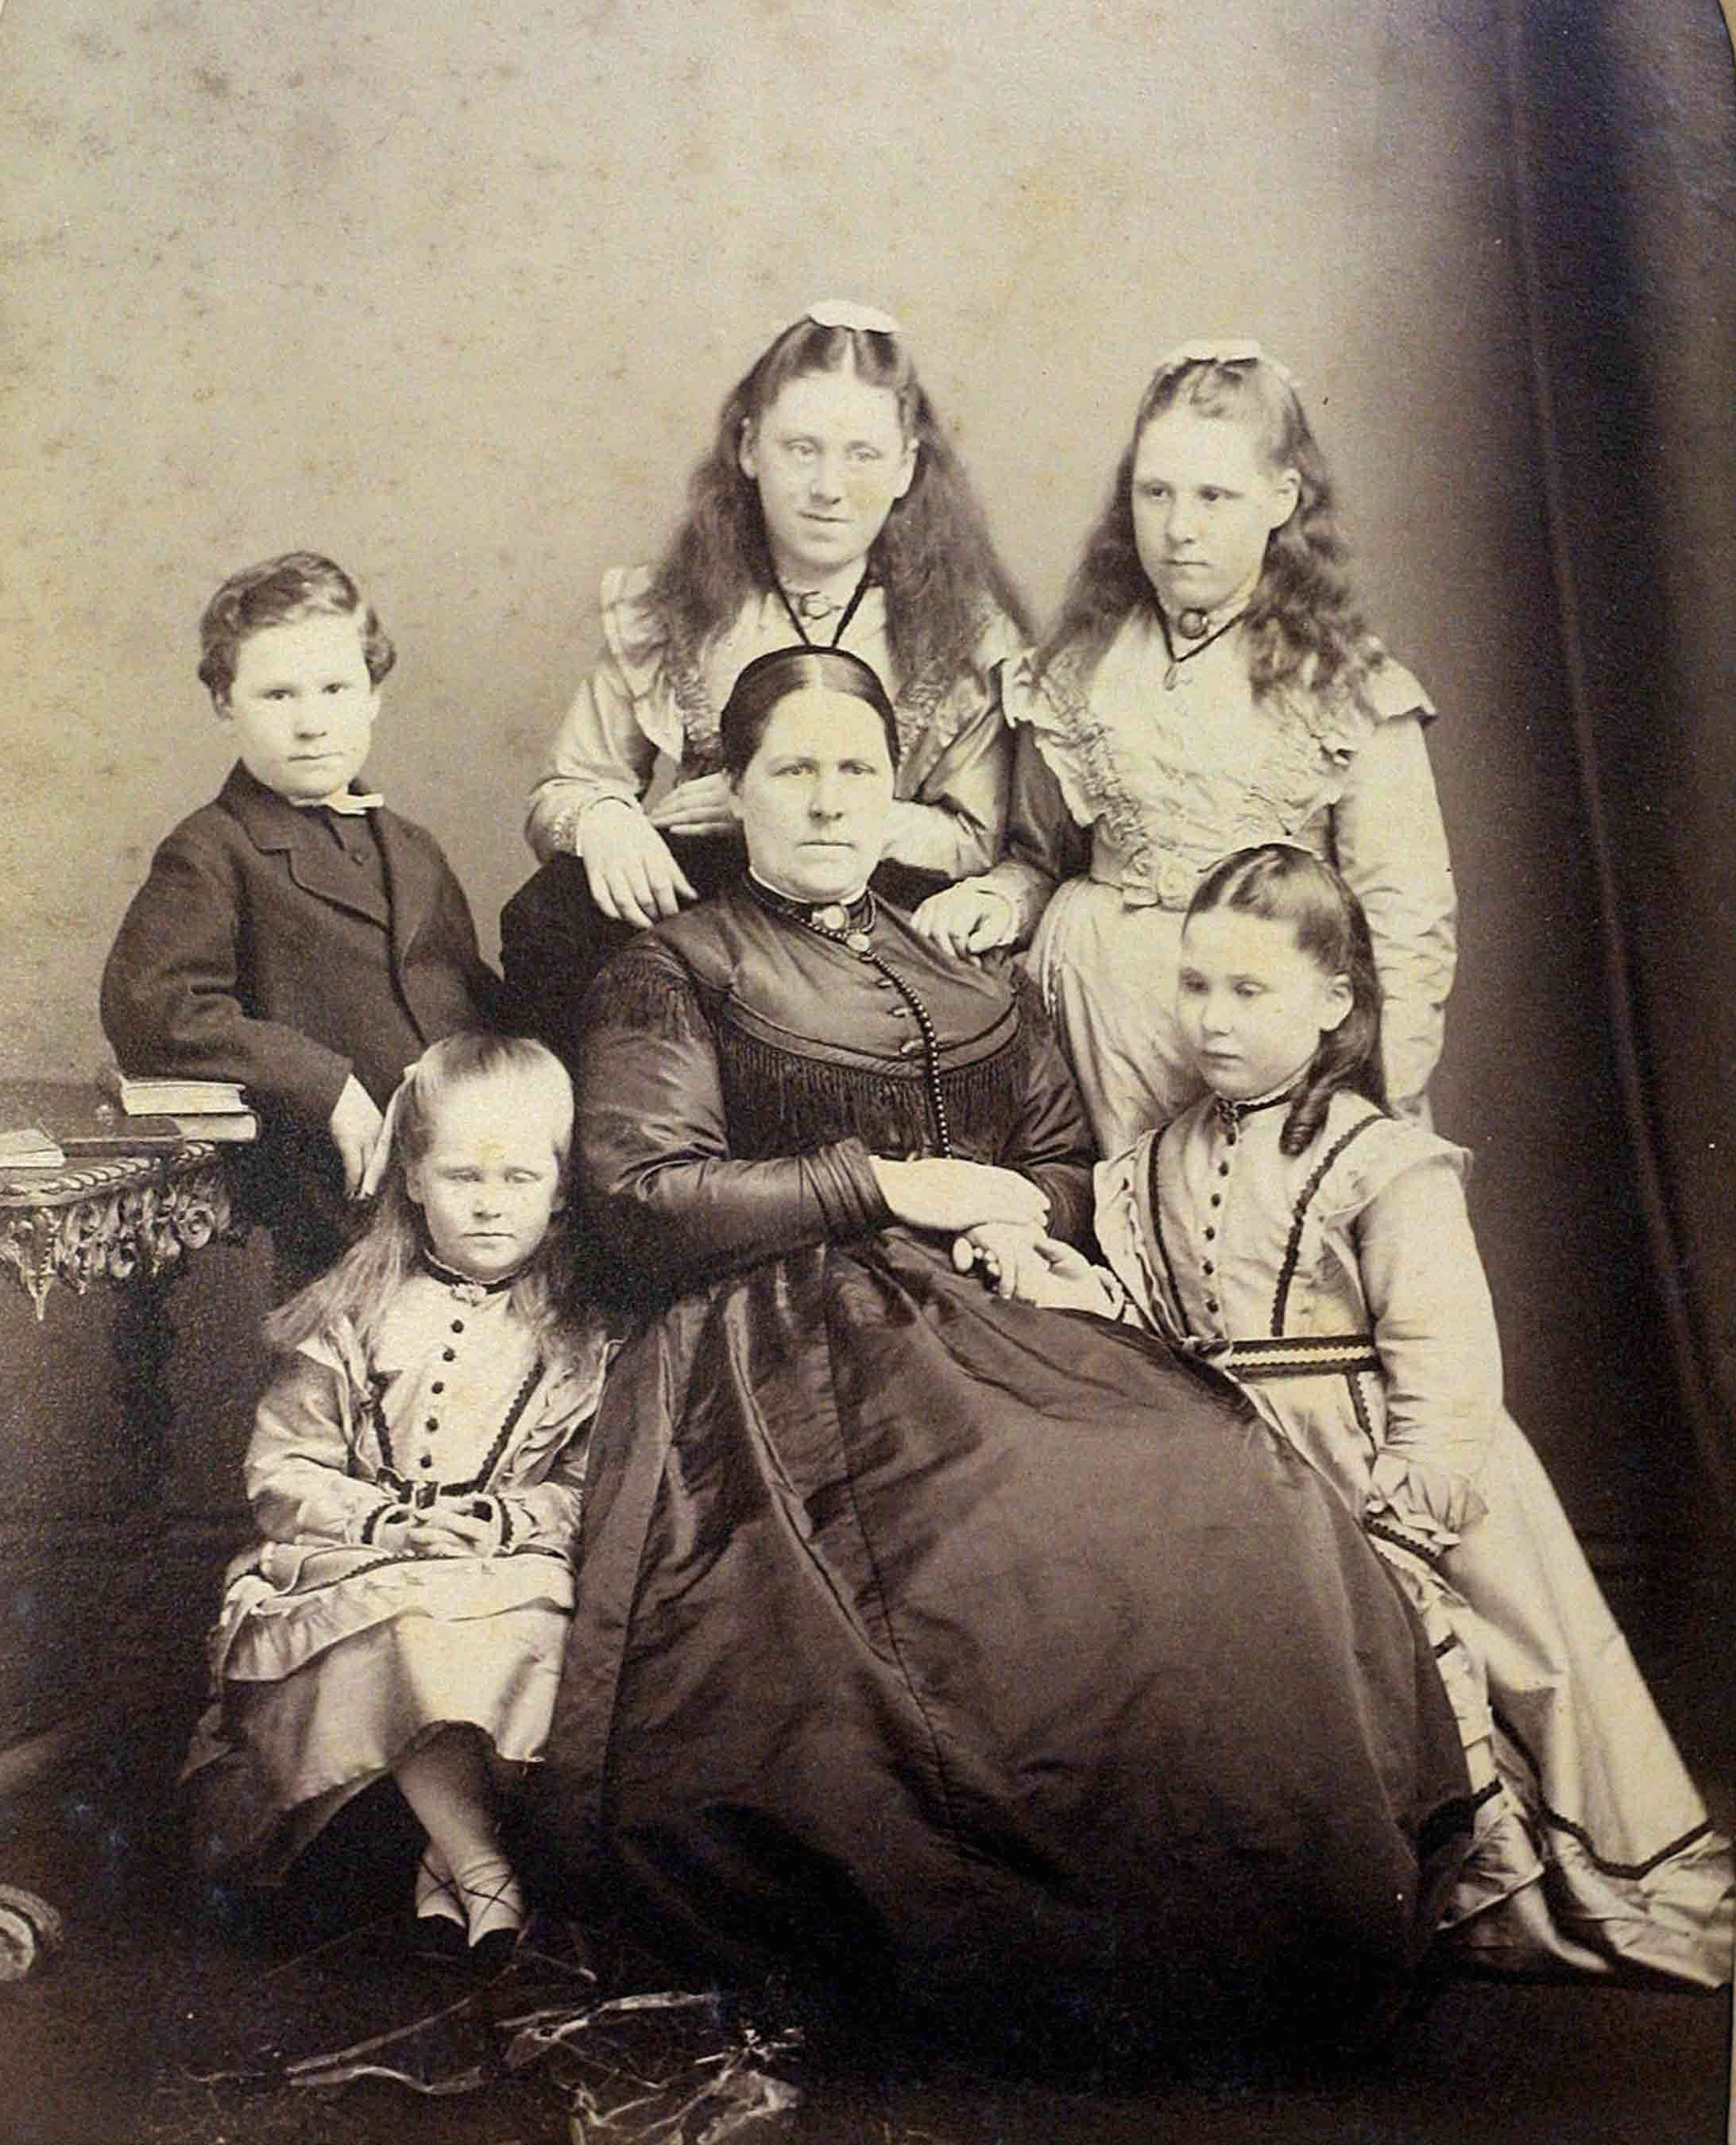 John Fowlers family around his wife, Elizabeth Lucy, who was the daughter of Joseph Pease. She is pictured with, back from left, John, Eli Pelly, Edith, and, on the front, Lucy and Laura. Pictures courtesy of the Darlington Centre for Local Studies